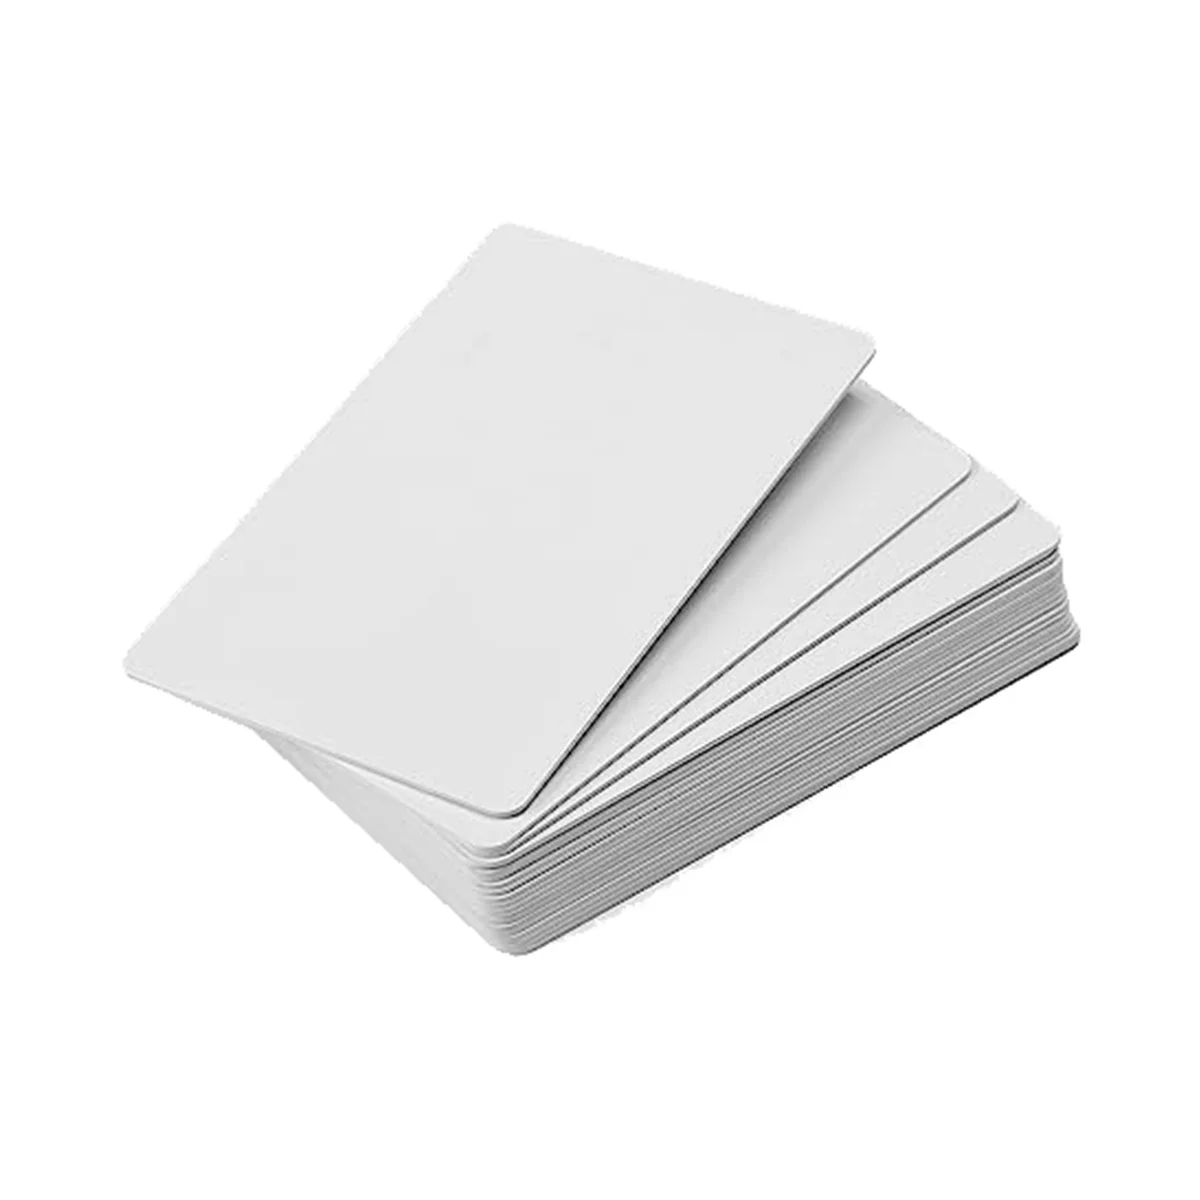 

100 PCS NTAG215 NFC Cards Blank 215 NFC Cards 215 Tags Rewritable NFC Cards 504 Bytes Memory for All NFC Enabled Device